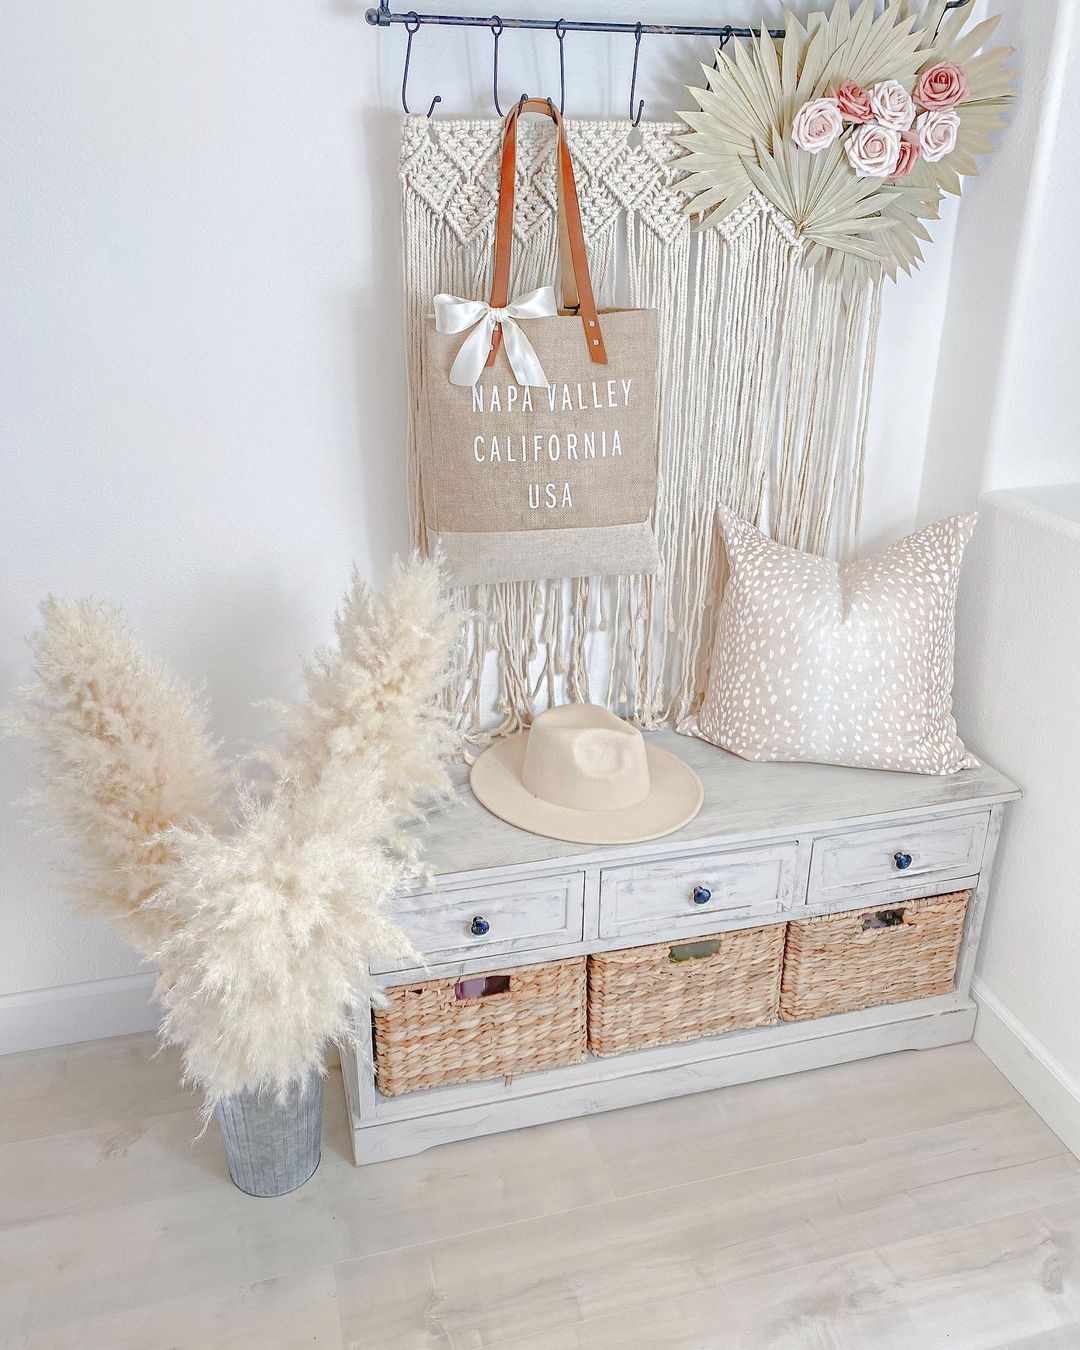 small entryway seating incorporating storage baskets and drawers with wall hangings, a hat, and a throw pillow to complete the decor